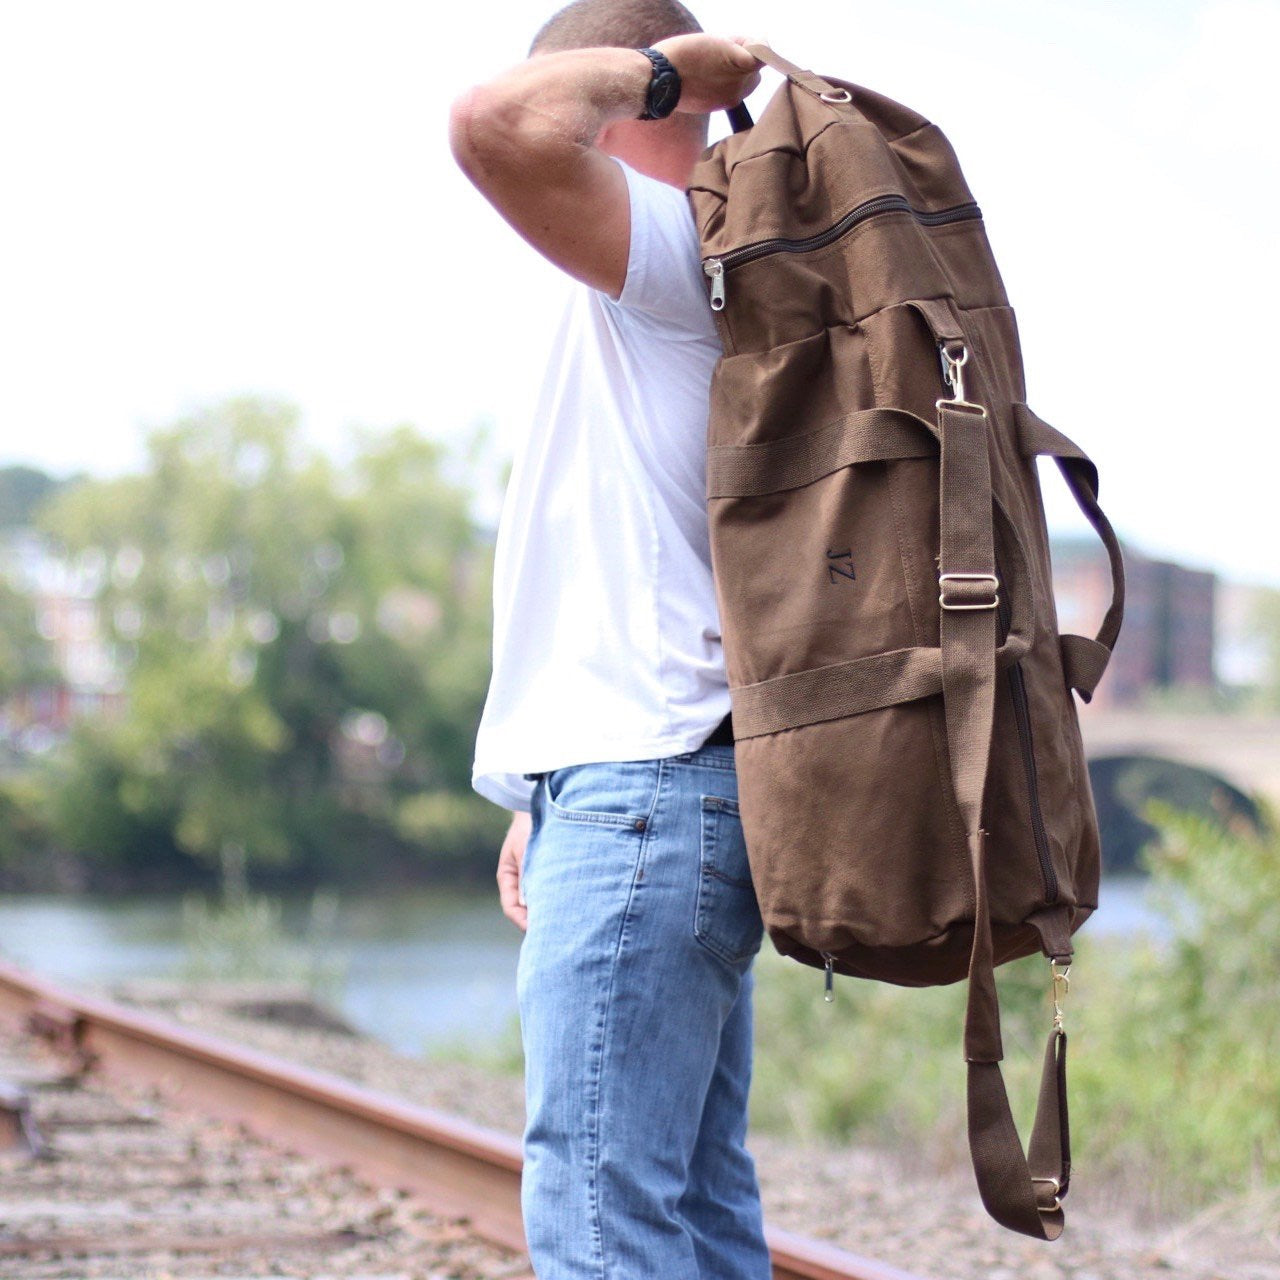 Weekender Duffle Bag for Men: Folding Waxed Canvas Duffle Bag Personalized  Gift for Him Father's Day Gift Anniversary Gift Made in USA 